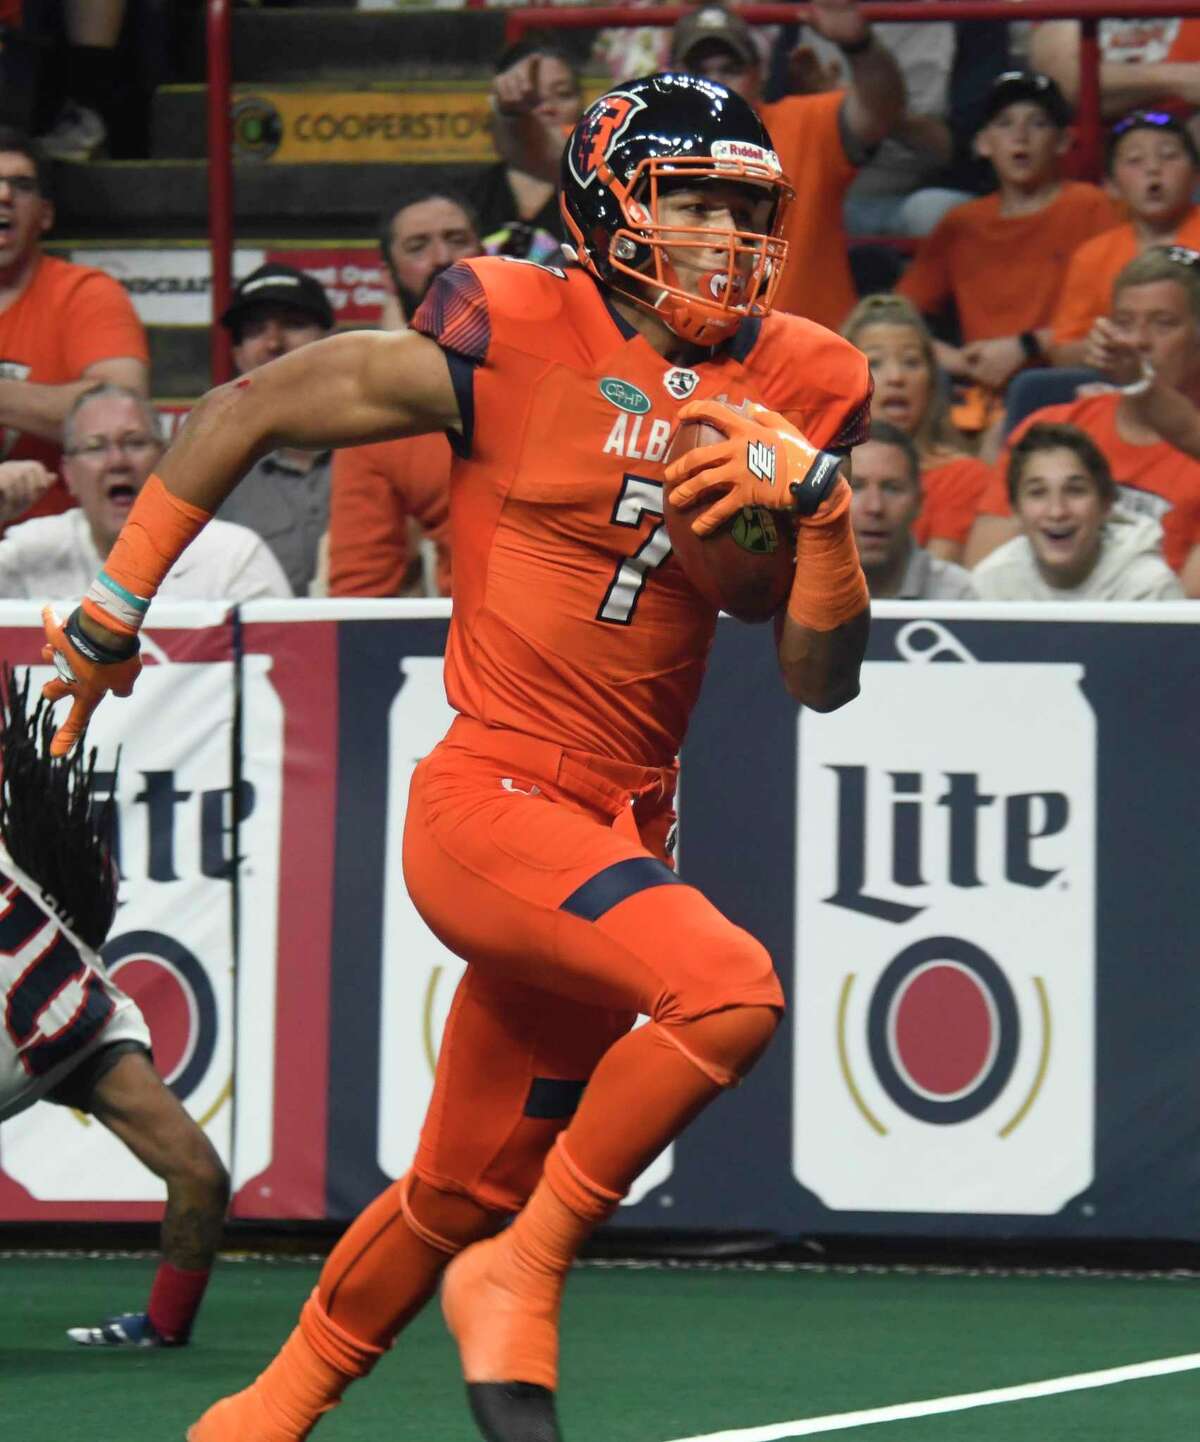 In two seasons with the AFL Empire, Malachi Jones had 173 receptions for 2,596 yards and 54 touchdowns.